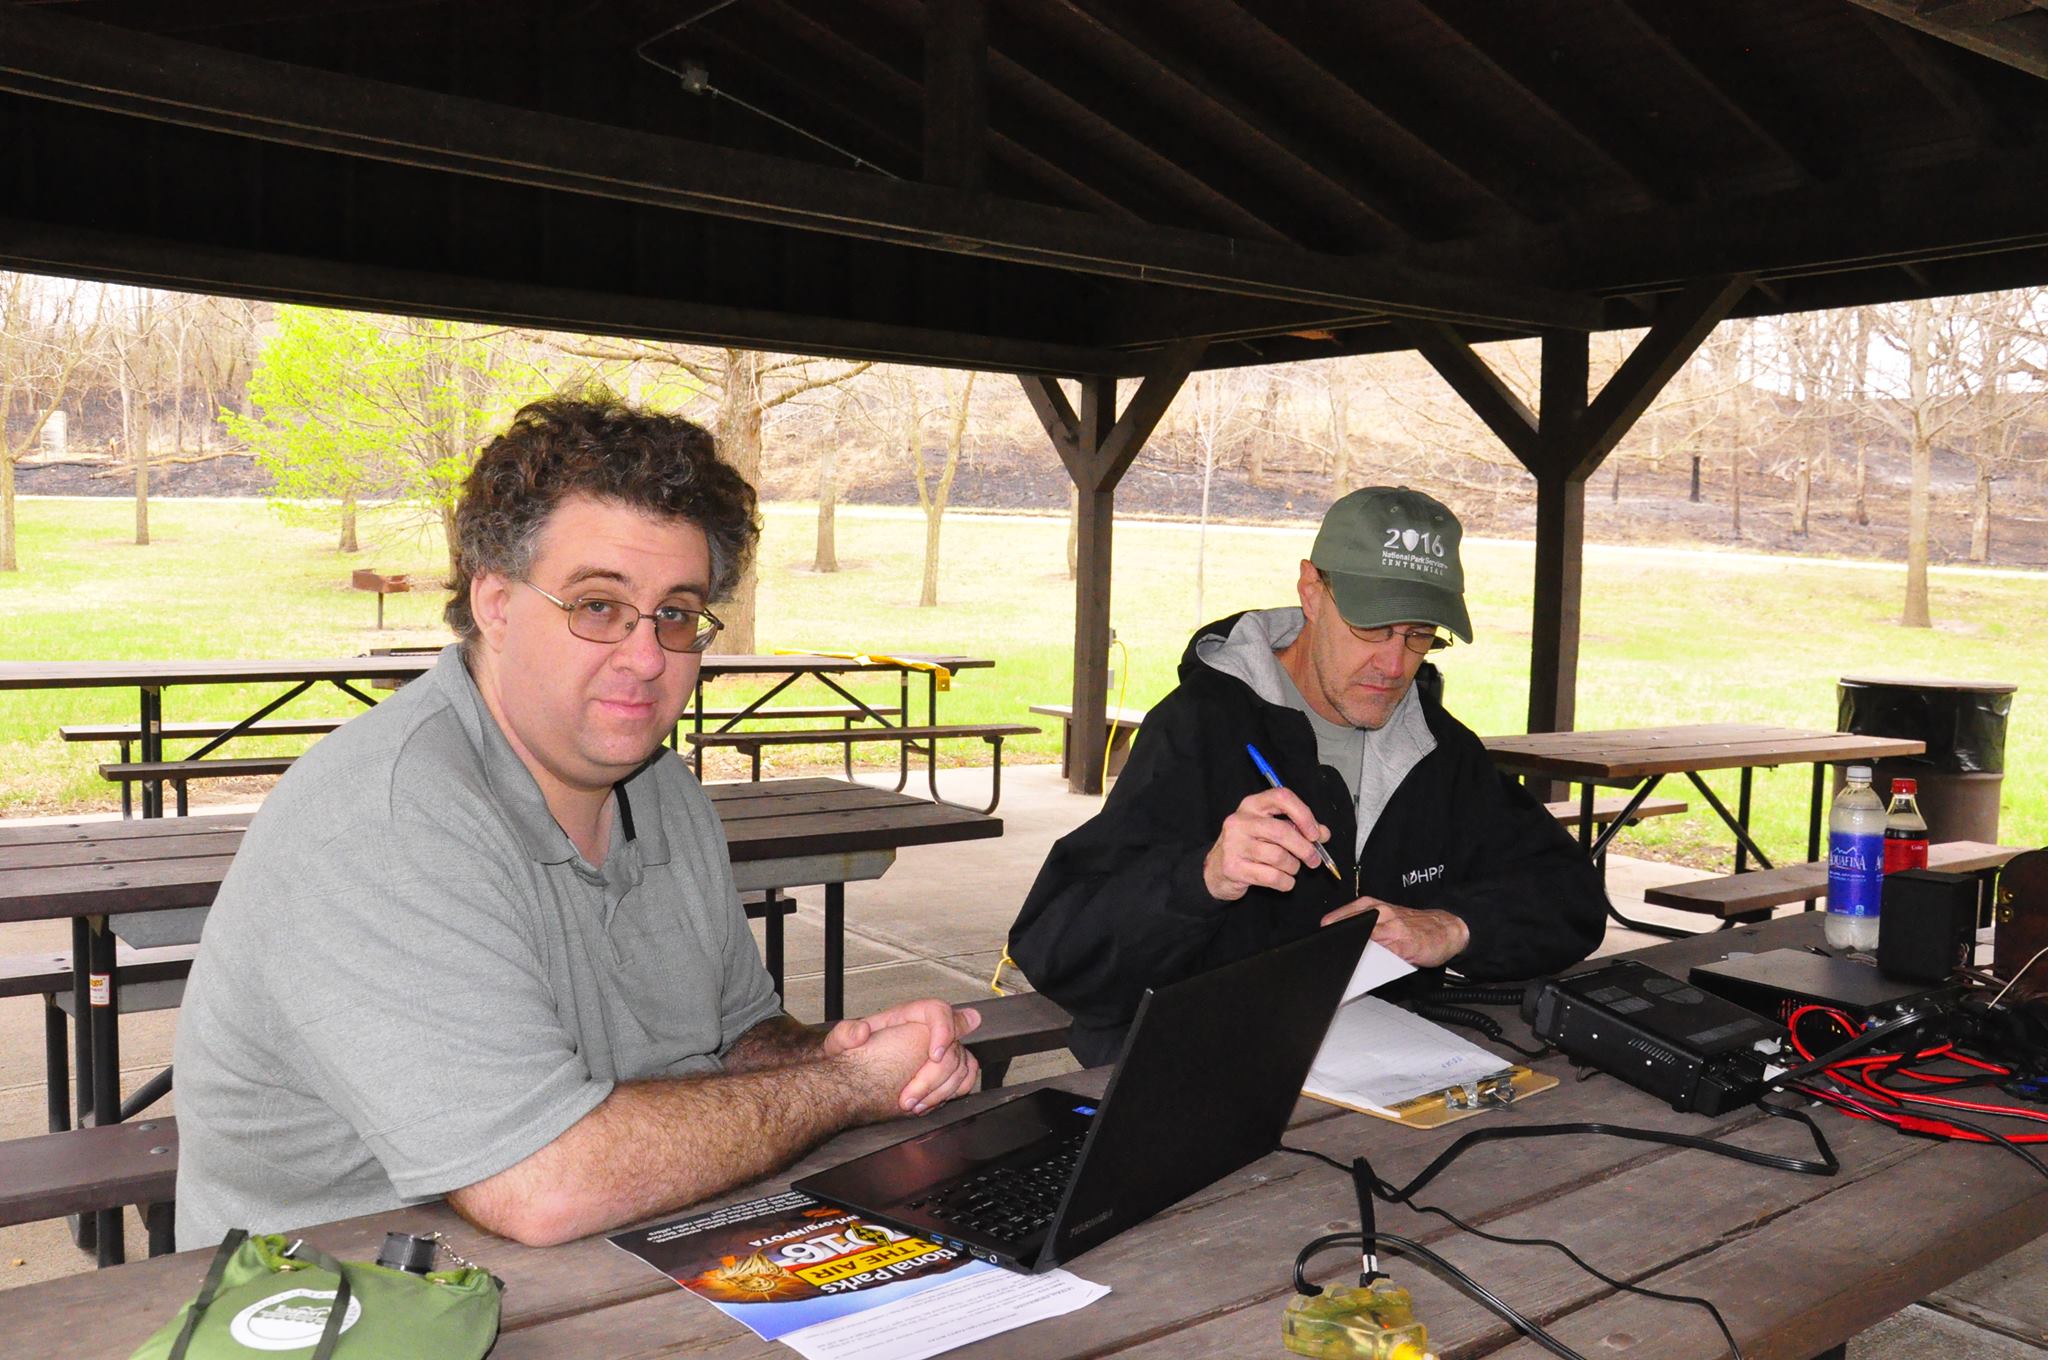 KD0MMG and K0CTU working the NE QSO Party from Rock Creek Station